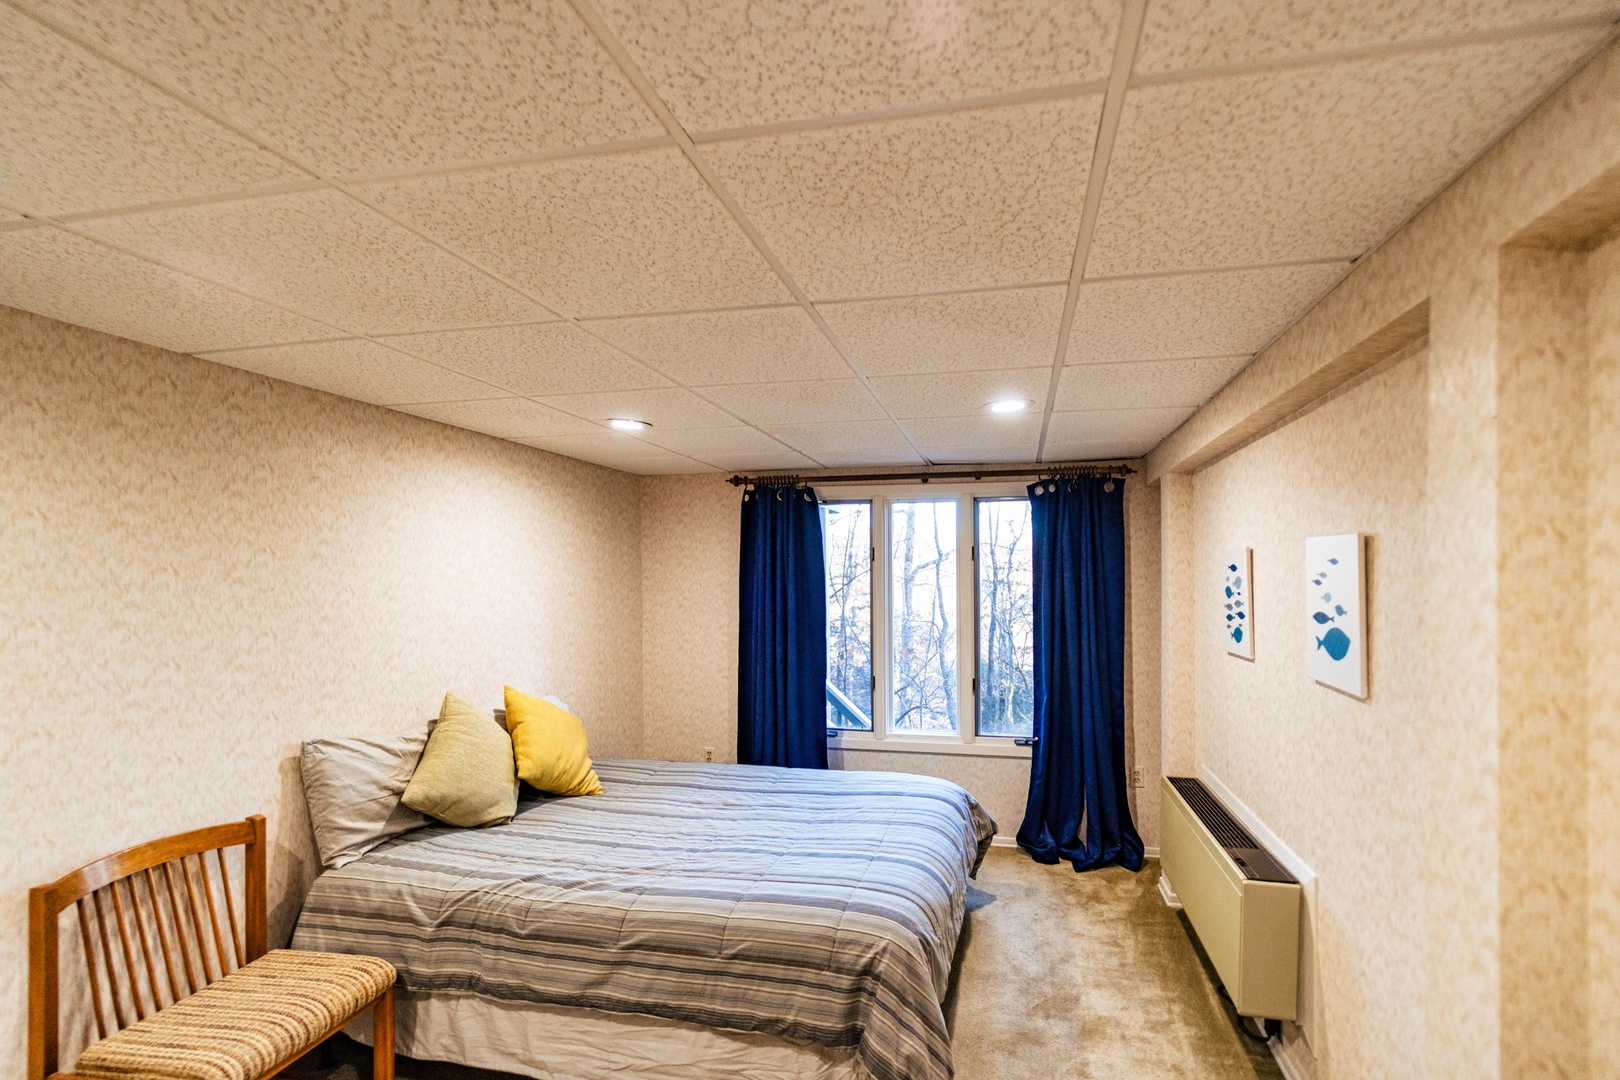 The lower-level bonus room boasts a queen bed, TV for gaming, & seating area